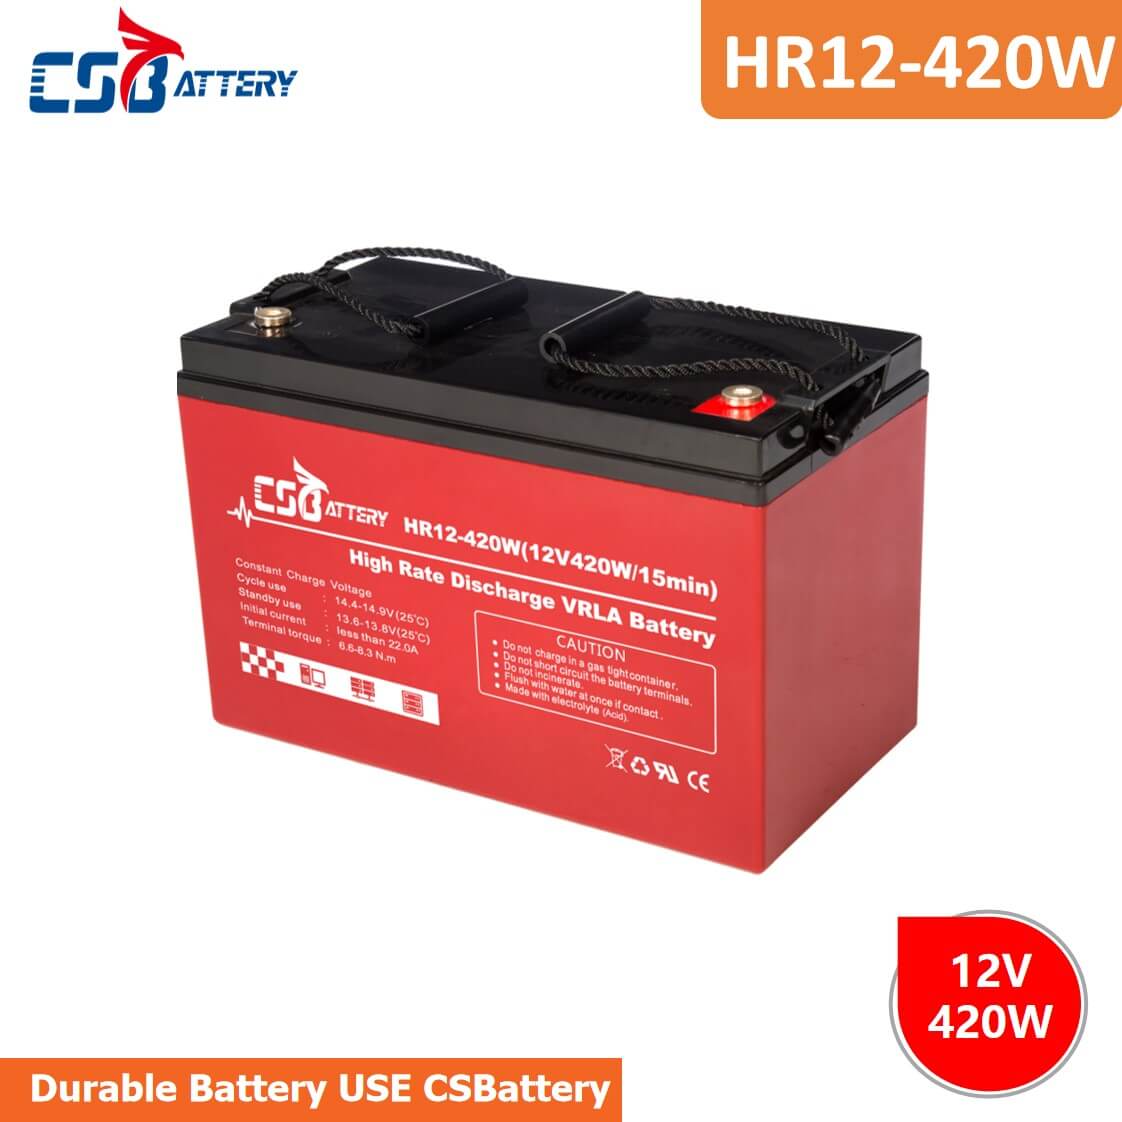 HR12-420W High Discharge Rate Battery